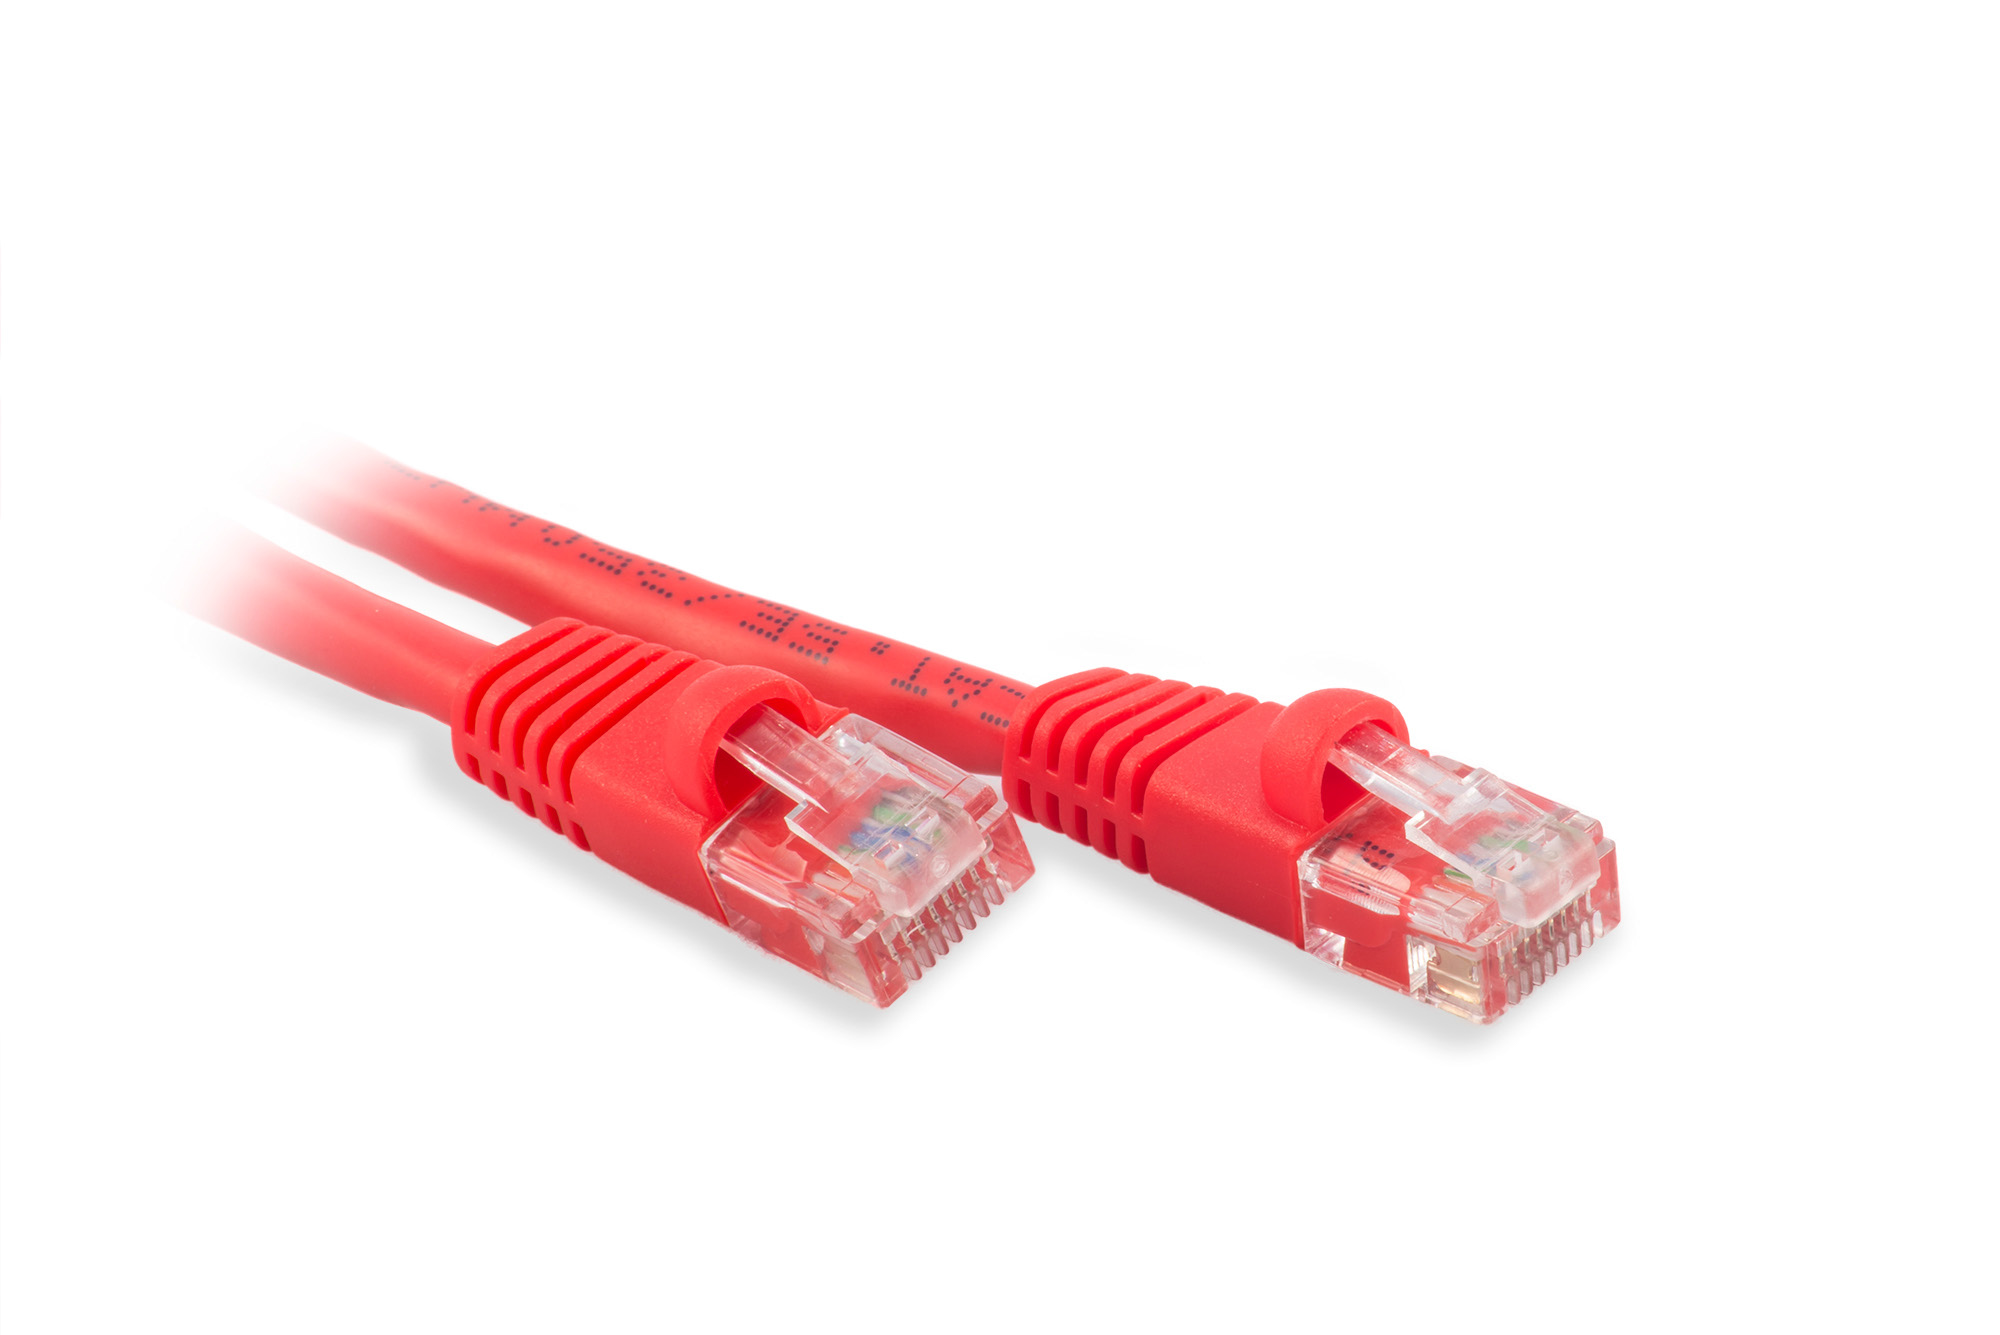 10ft Cat5e Ethernet Patch Cable - Red Color - Snagless Boot